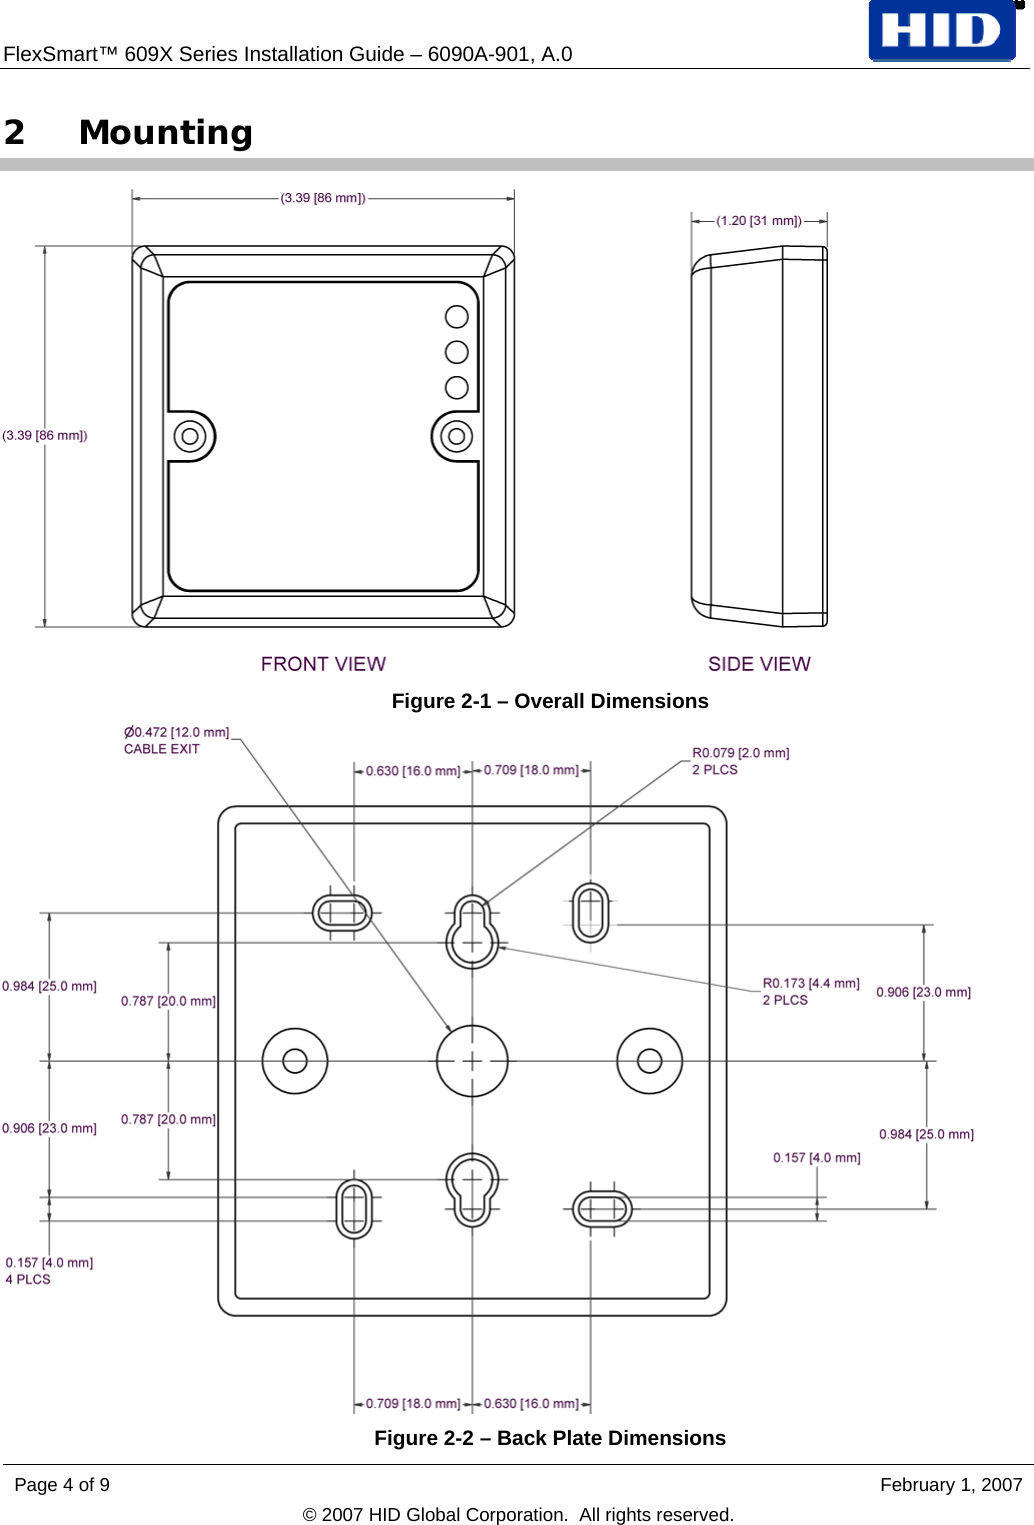 FlexSmart™ 609X Series Installation Guide – 6090A-901, A.0   2 Mounting  Figure 2-1 – Overall Dimensions  Figure 2-2 – Back Plate Dimensions Page 4 of 9    February 1, 2007 © 2007 HID Global Corporation.  All rights reserved.  